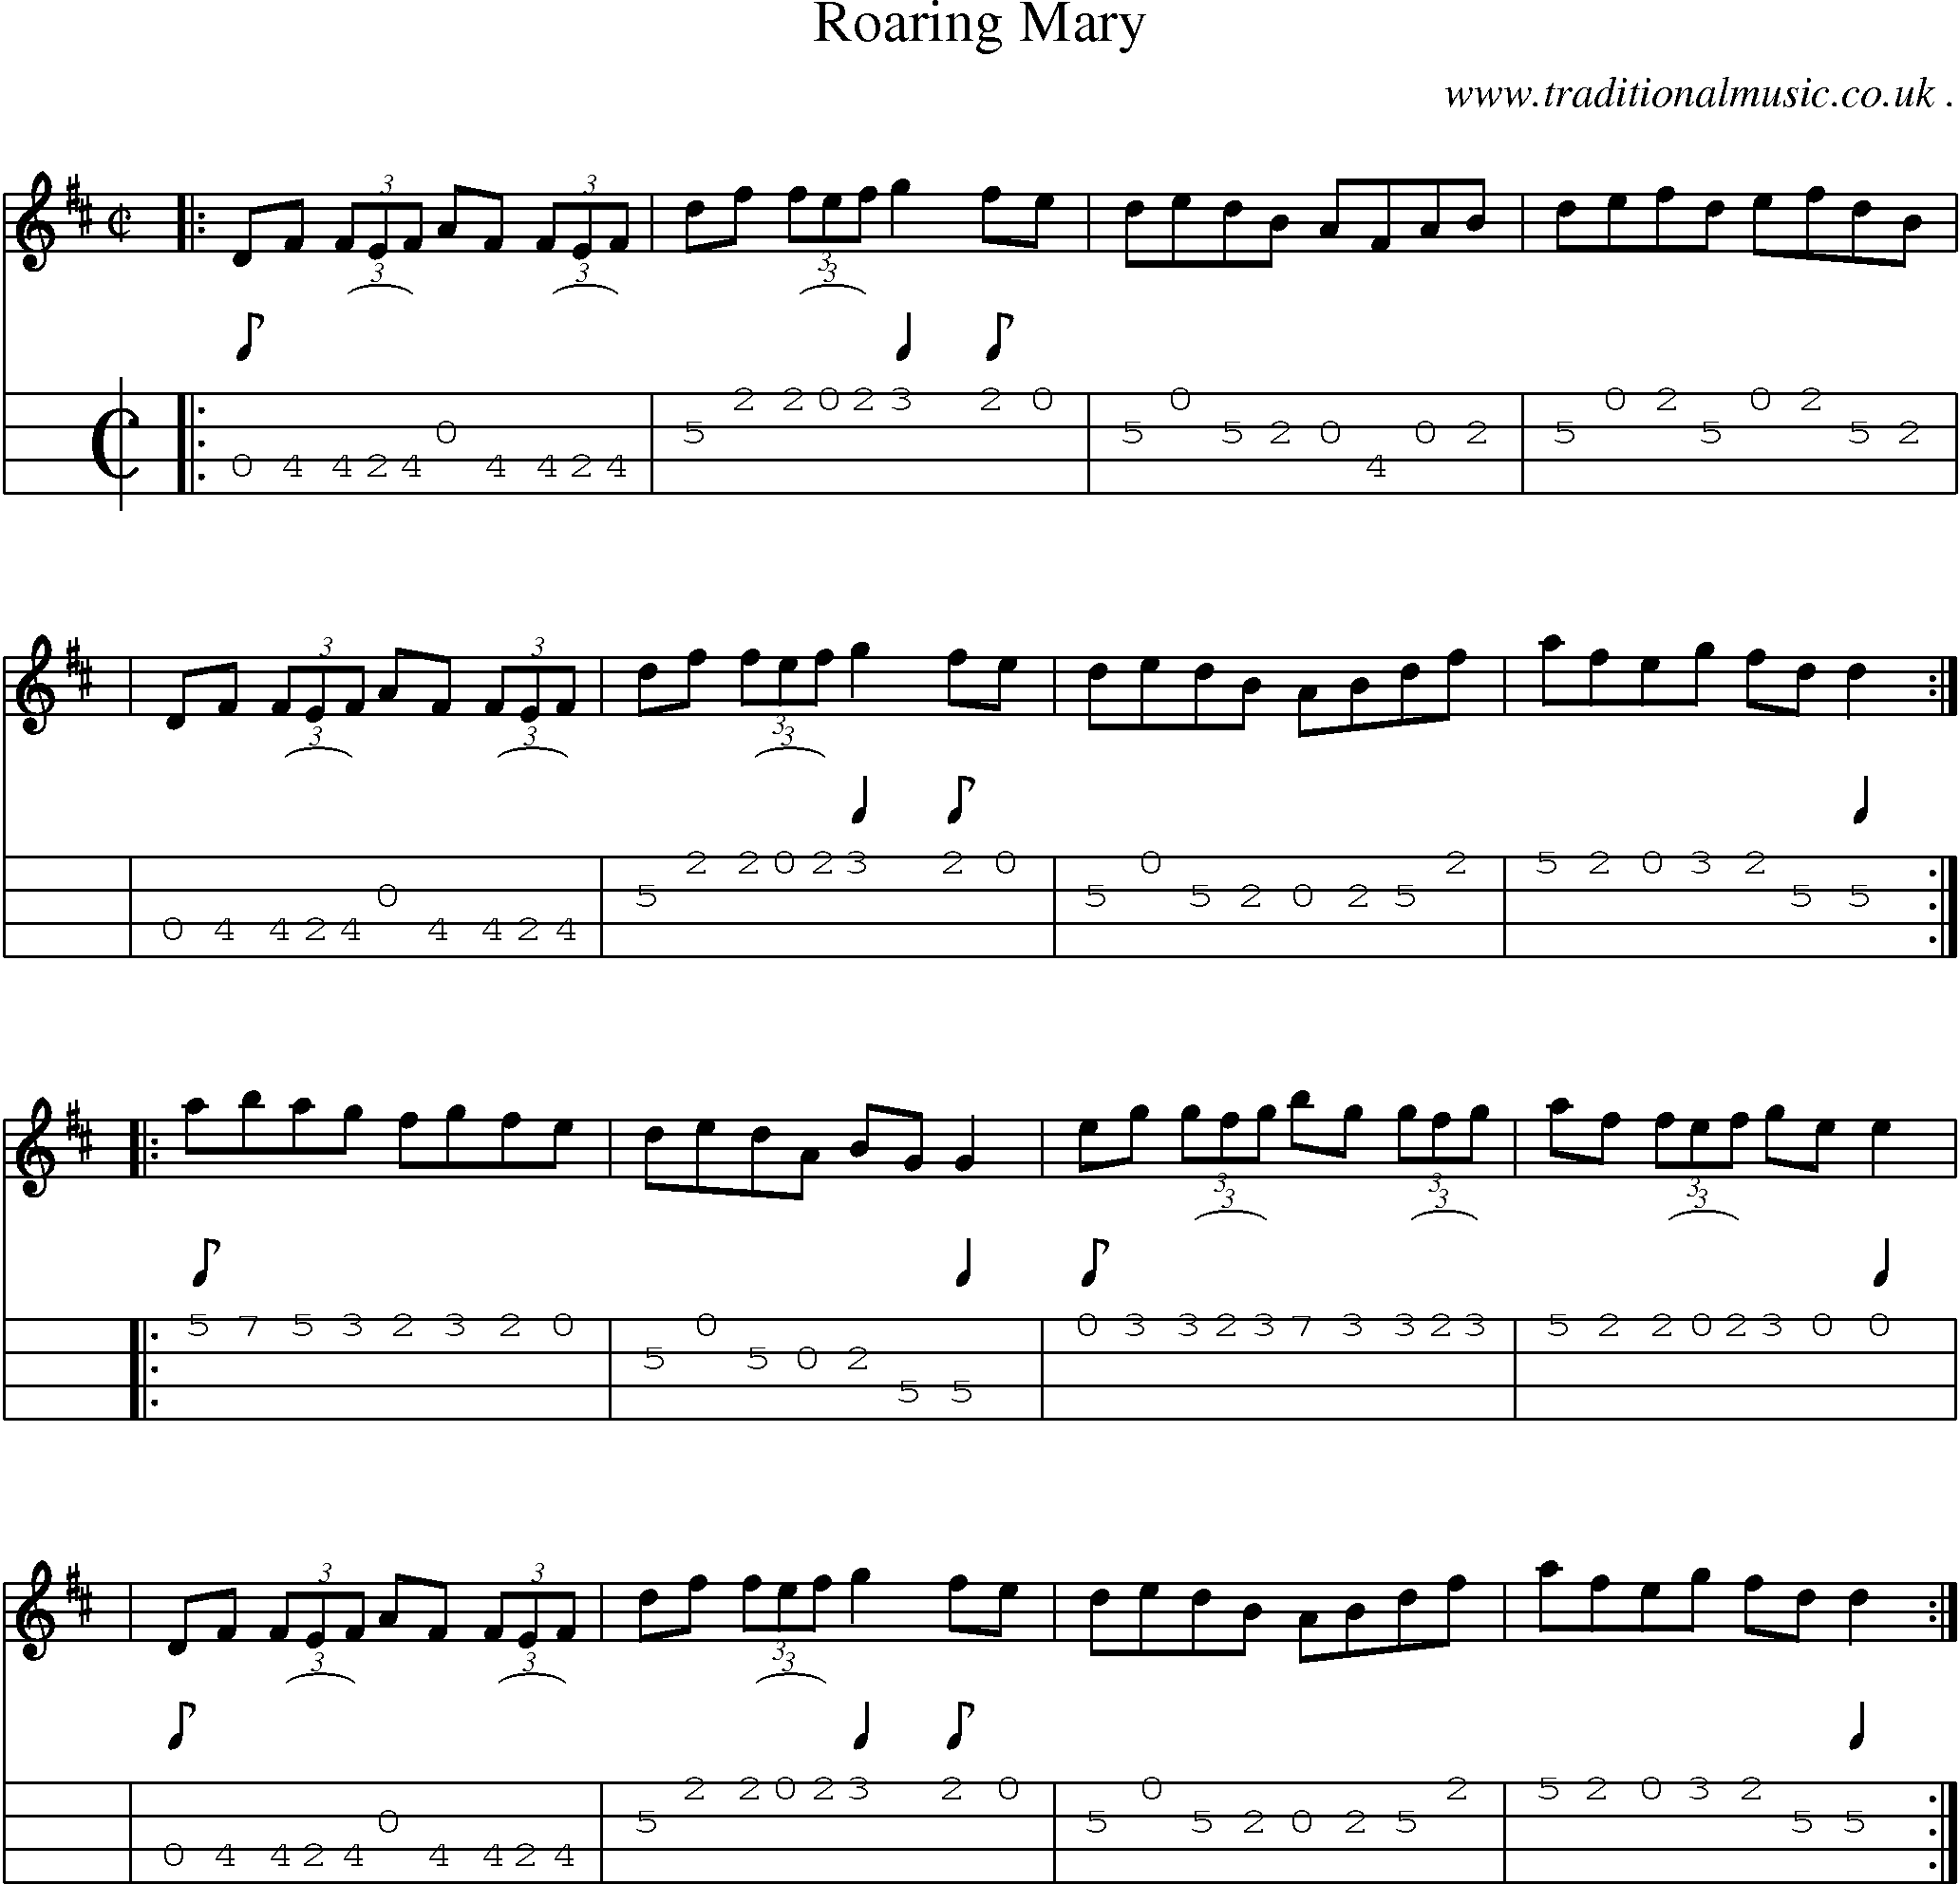 Sheet-music  score, Chords and Mandolin Tabs for Roaring Mary